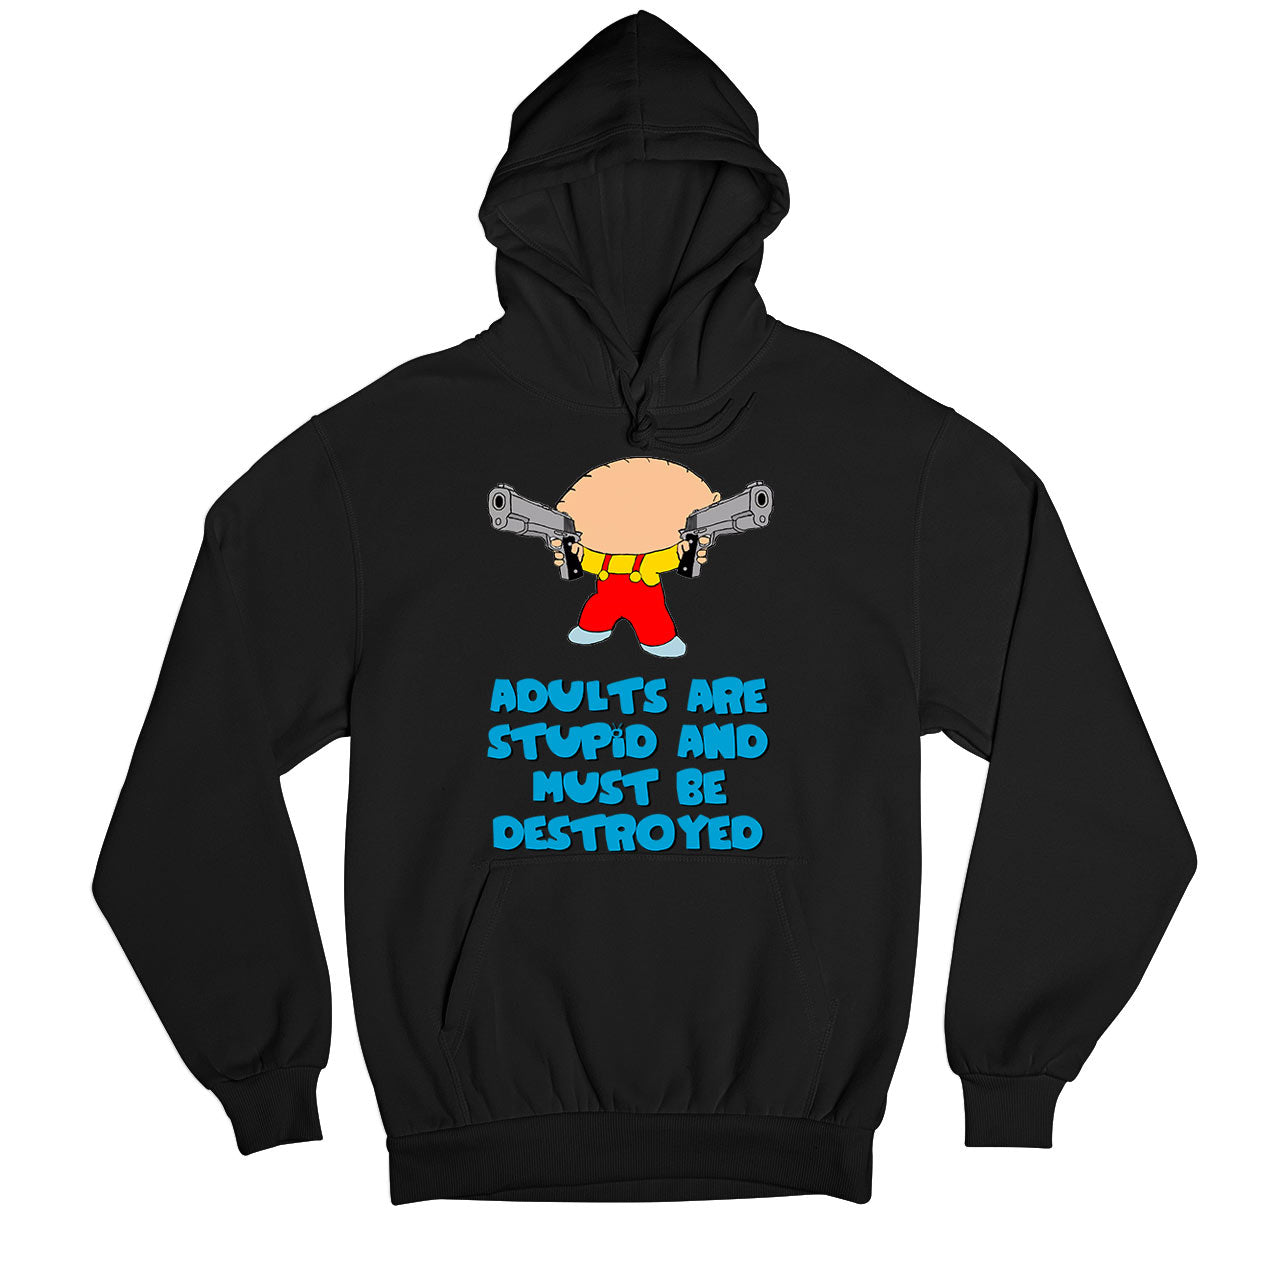 family guy adults are stupid hoodie hooded sweatshirt winterwear tv & movies buy online usa united states of america the banyan tee tbt men women girls boys unisex black - stewie griffin dialogue